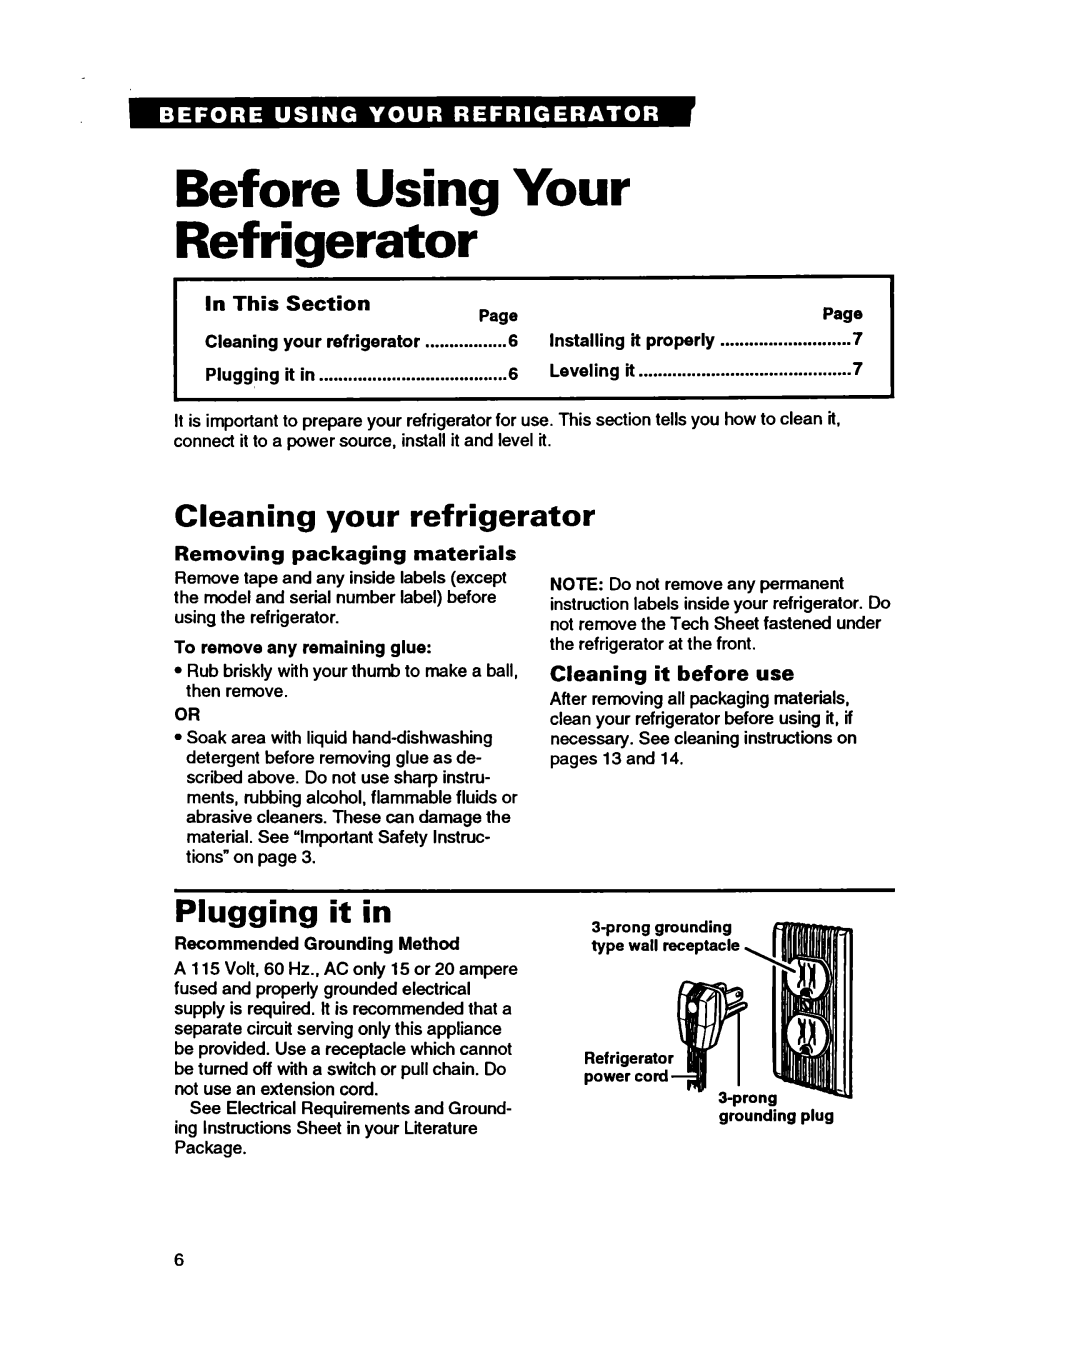 Whirlpool RT14GD, RT14HD Before Using Your Refrigerator, Cleaning your refrigerator, Plugging it in, In This, Section 